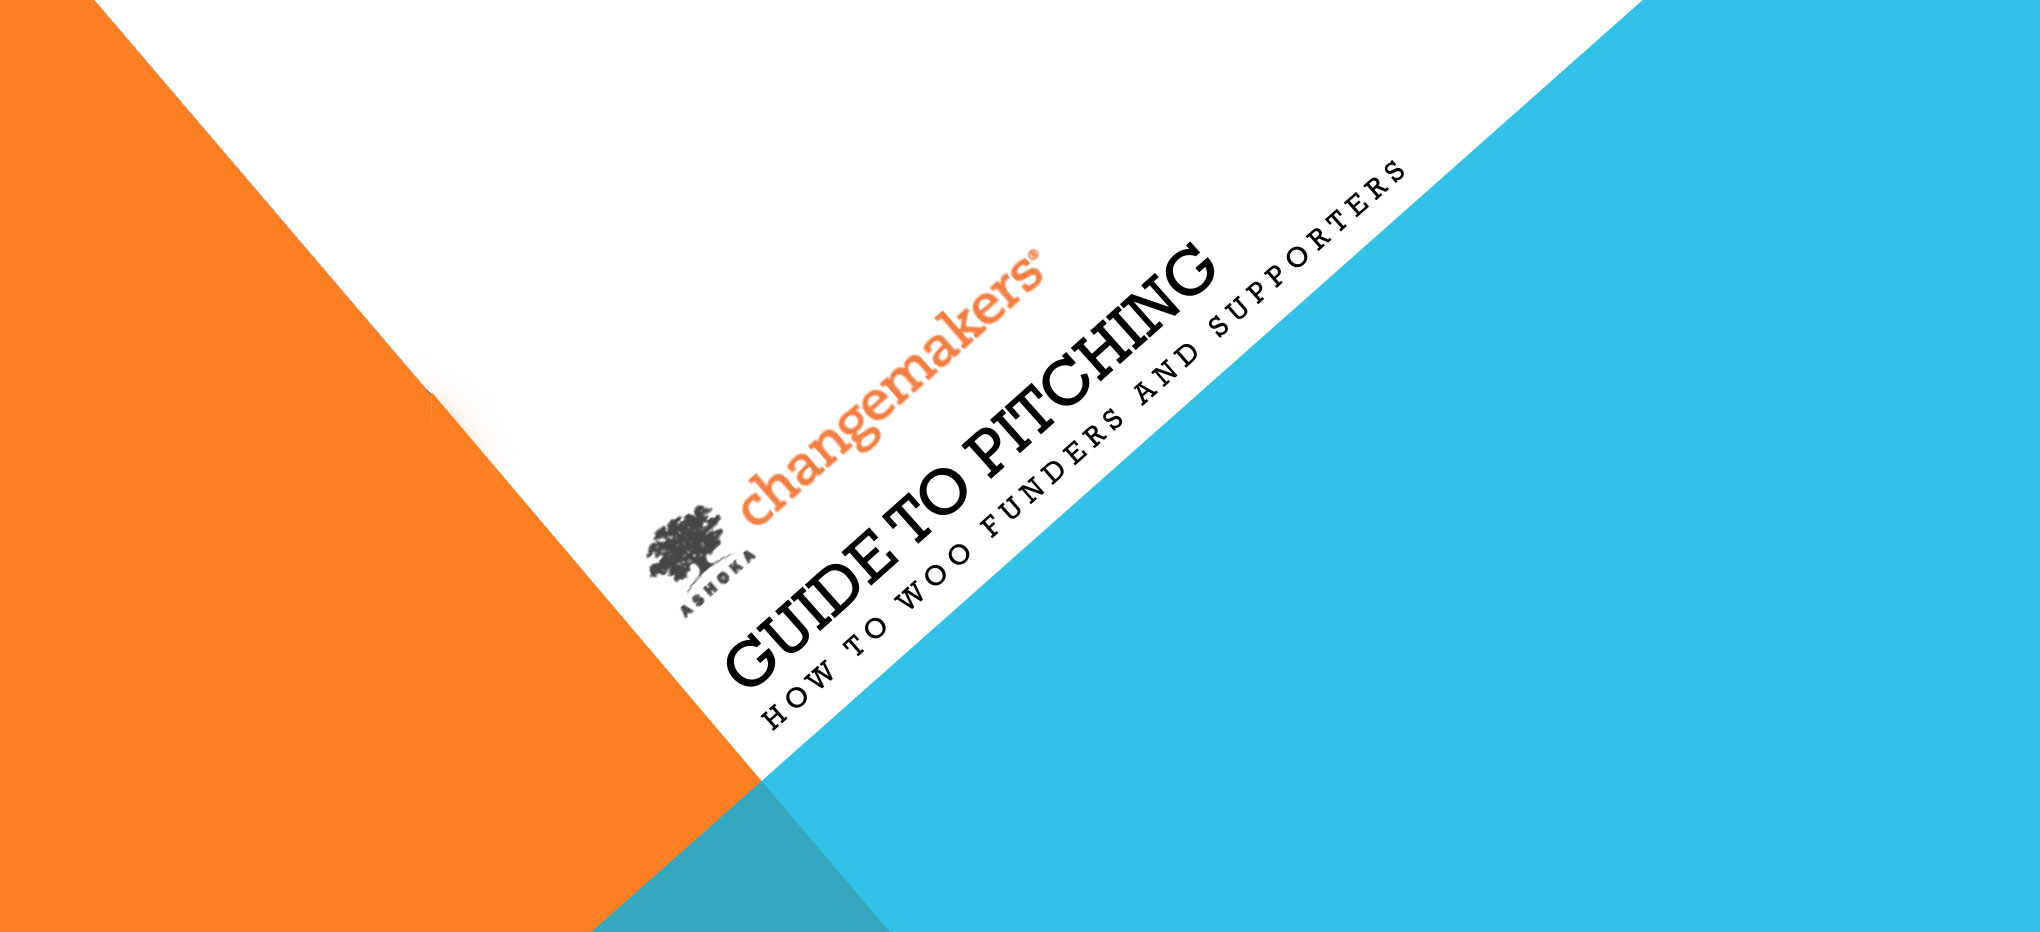 A web banner with a geometric design with overlapping shapes in orange and sky blue. Nestled in the corner of the overlapping shapes is the Ashoka Changemaker's logo along with the text Guide to Pitching How to Woo Funders & Supporters